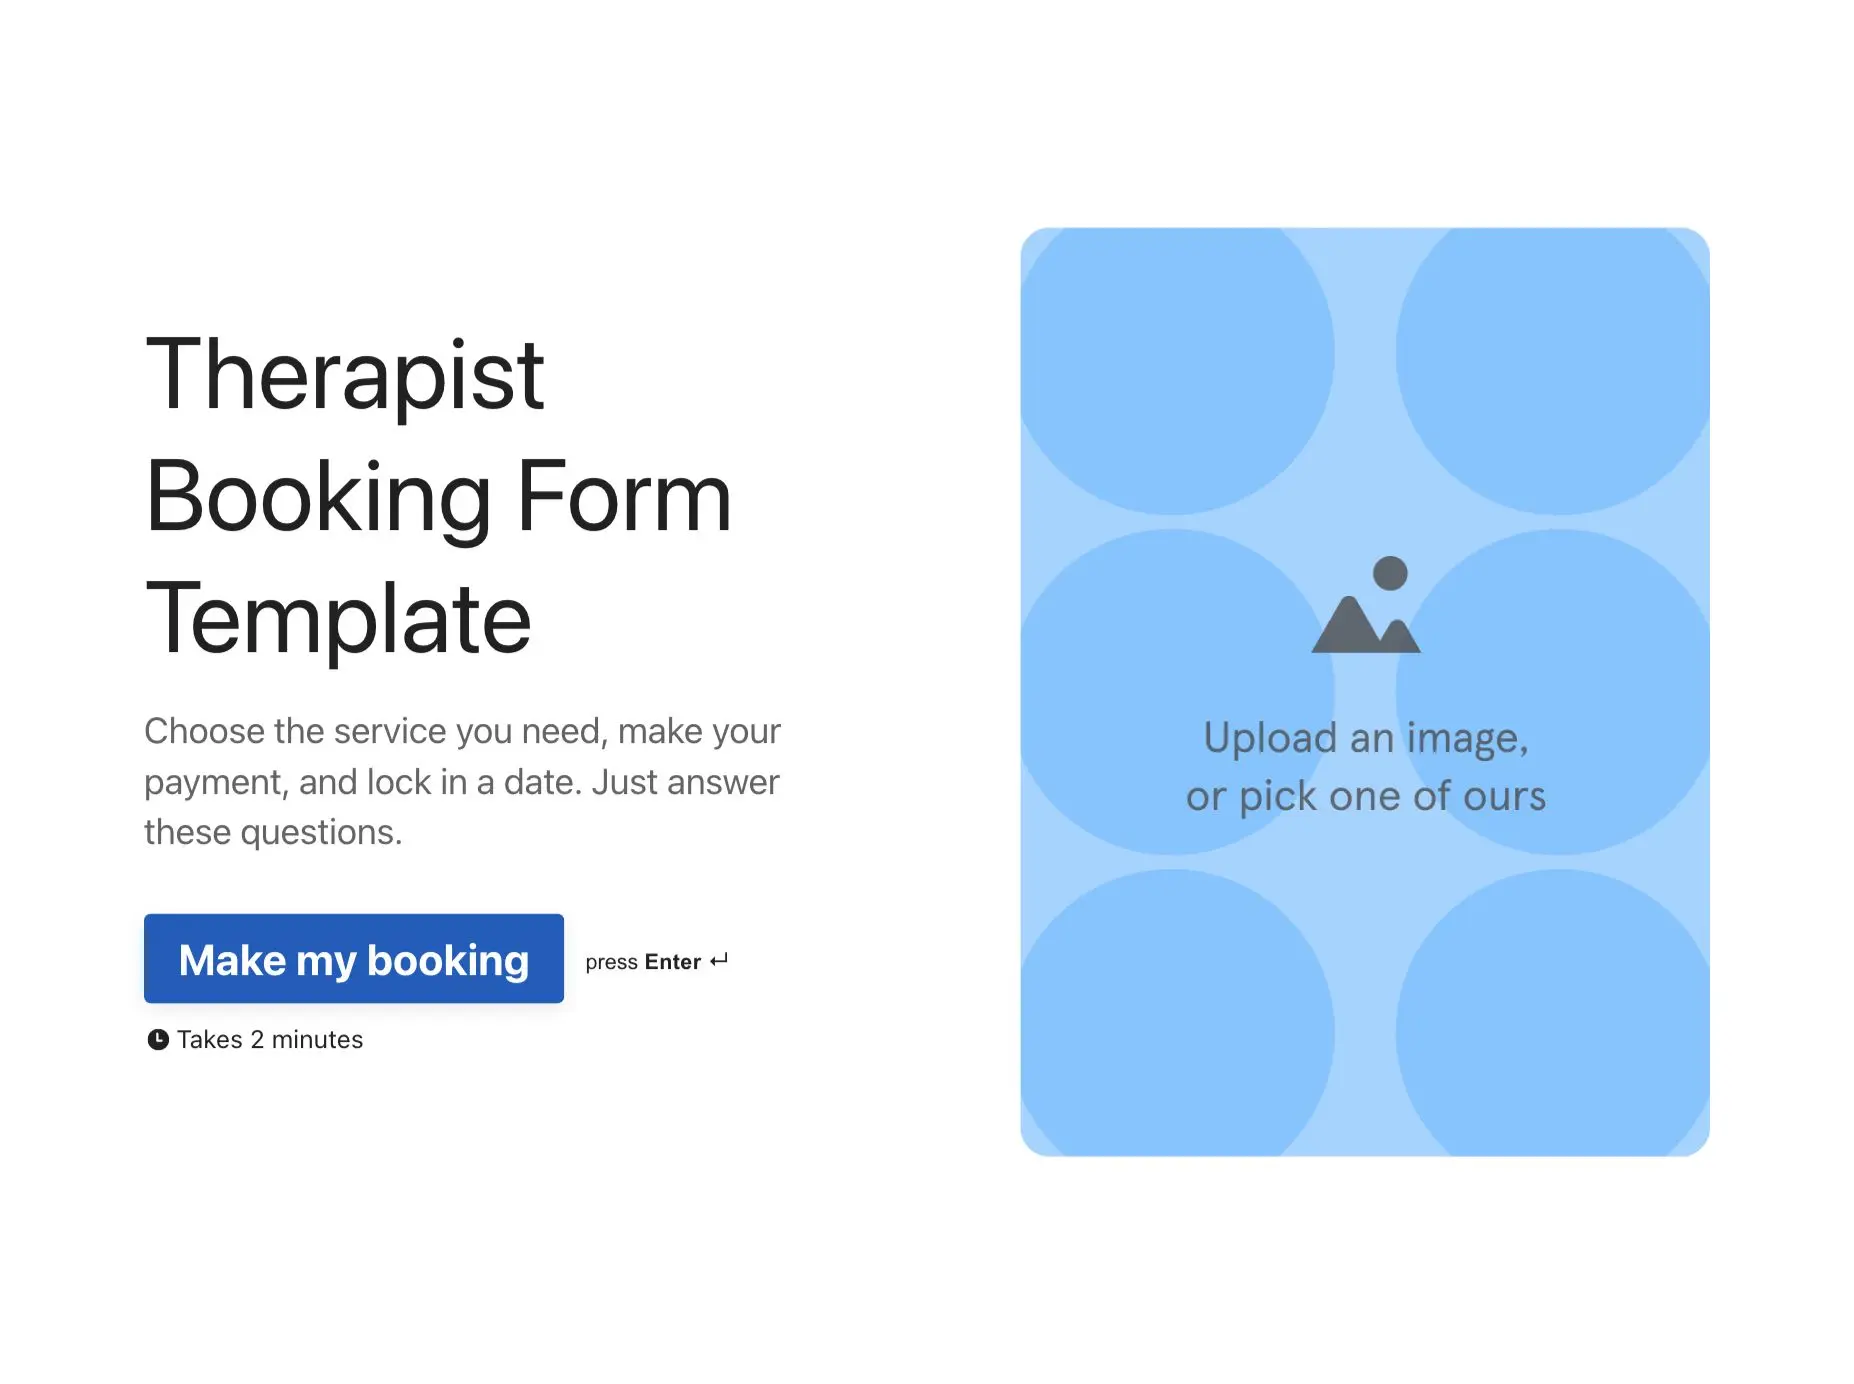 Therapist Booking Form Template Hero